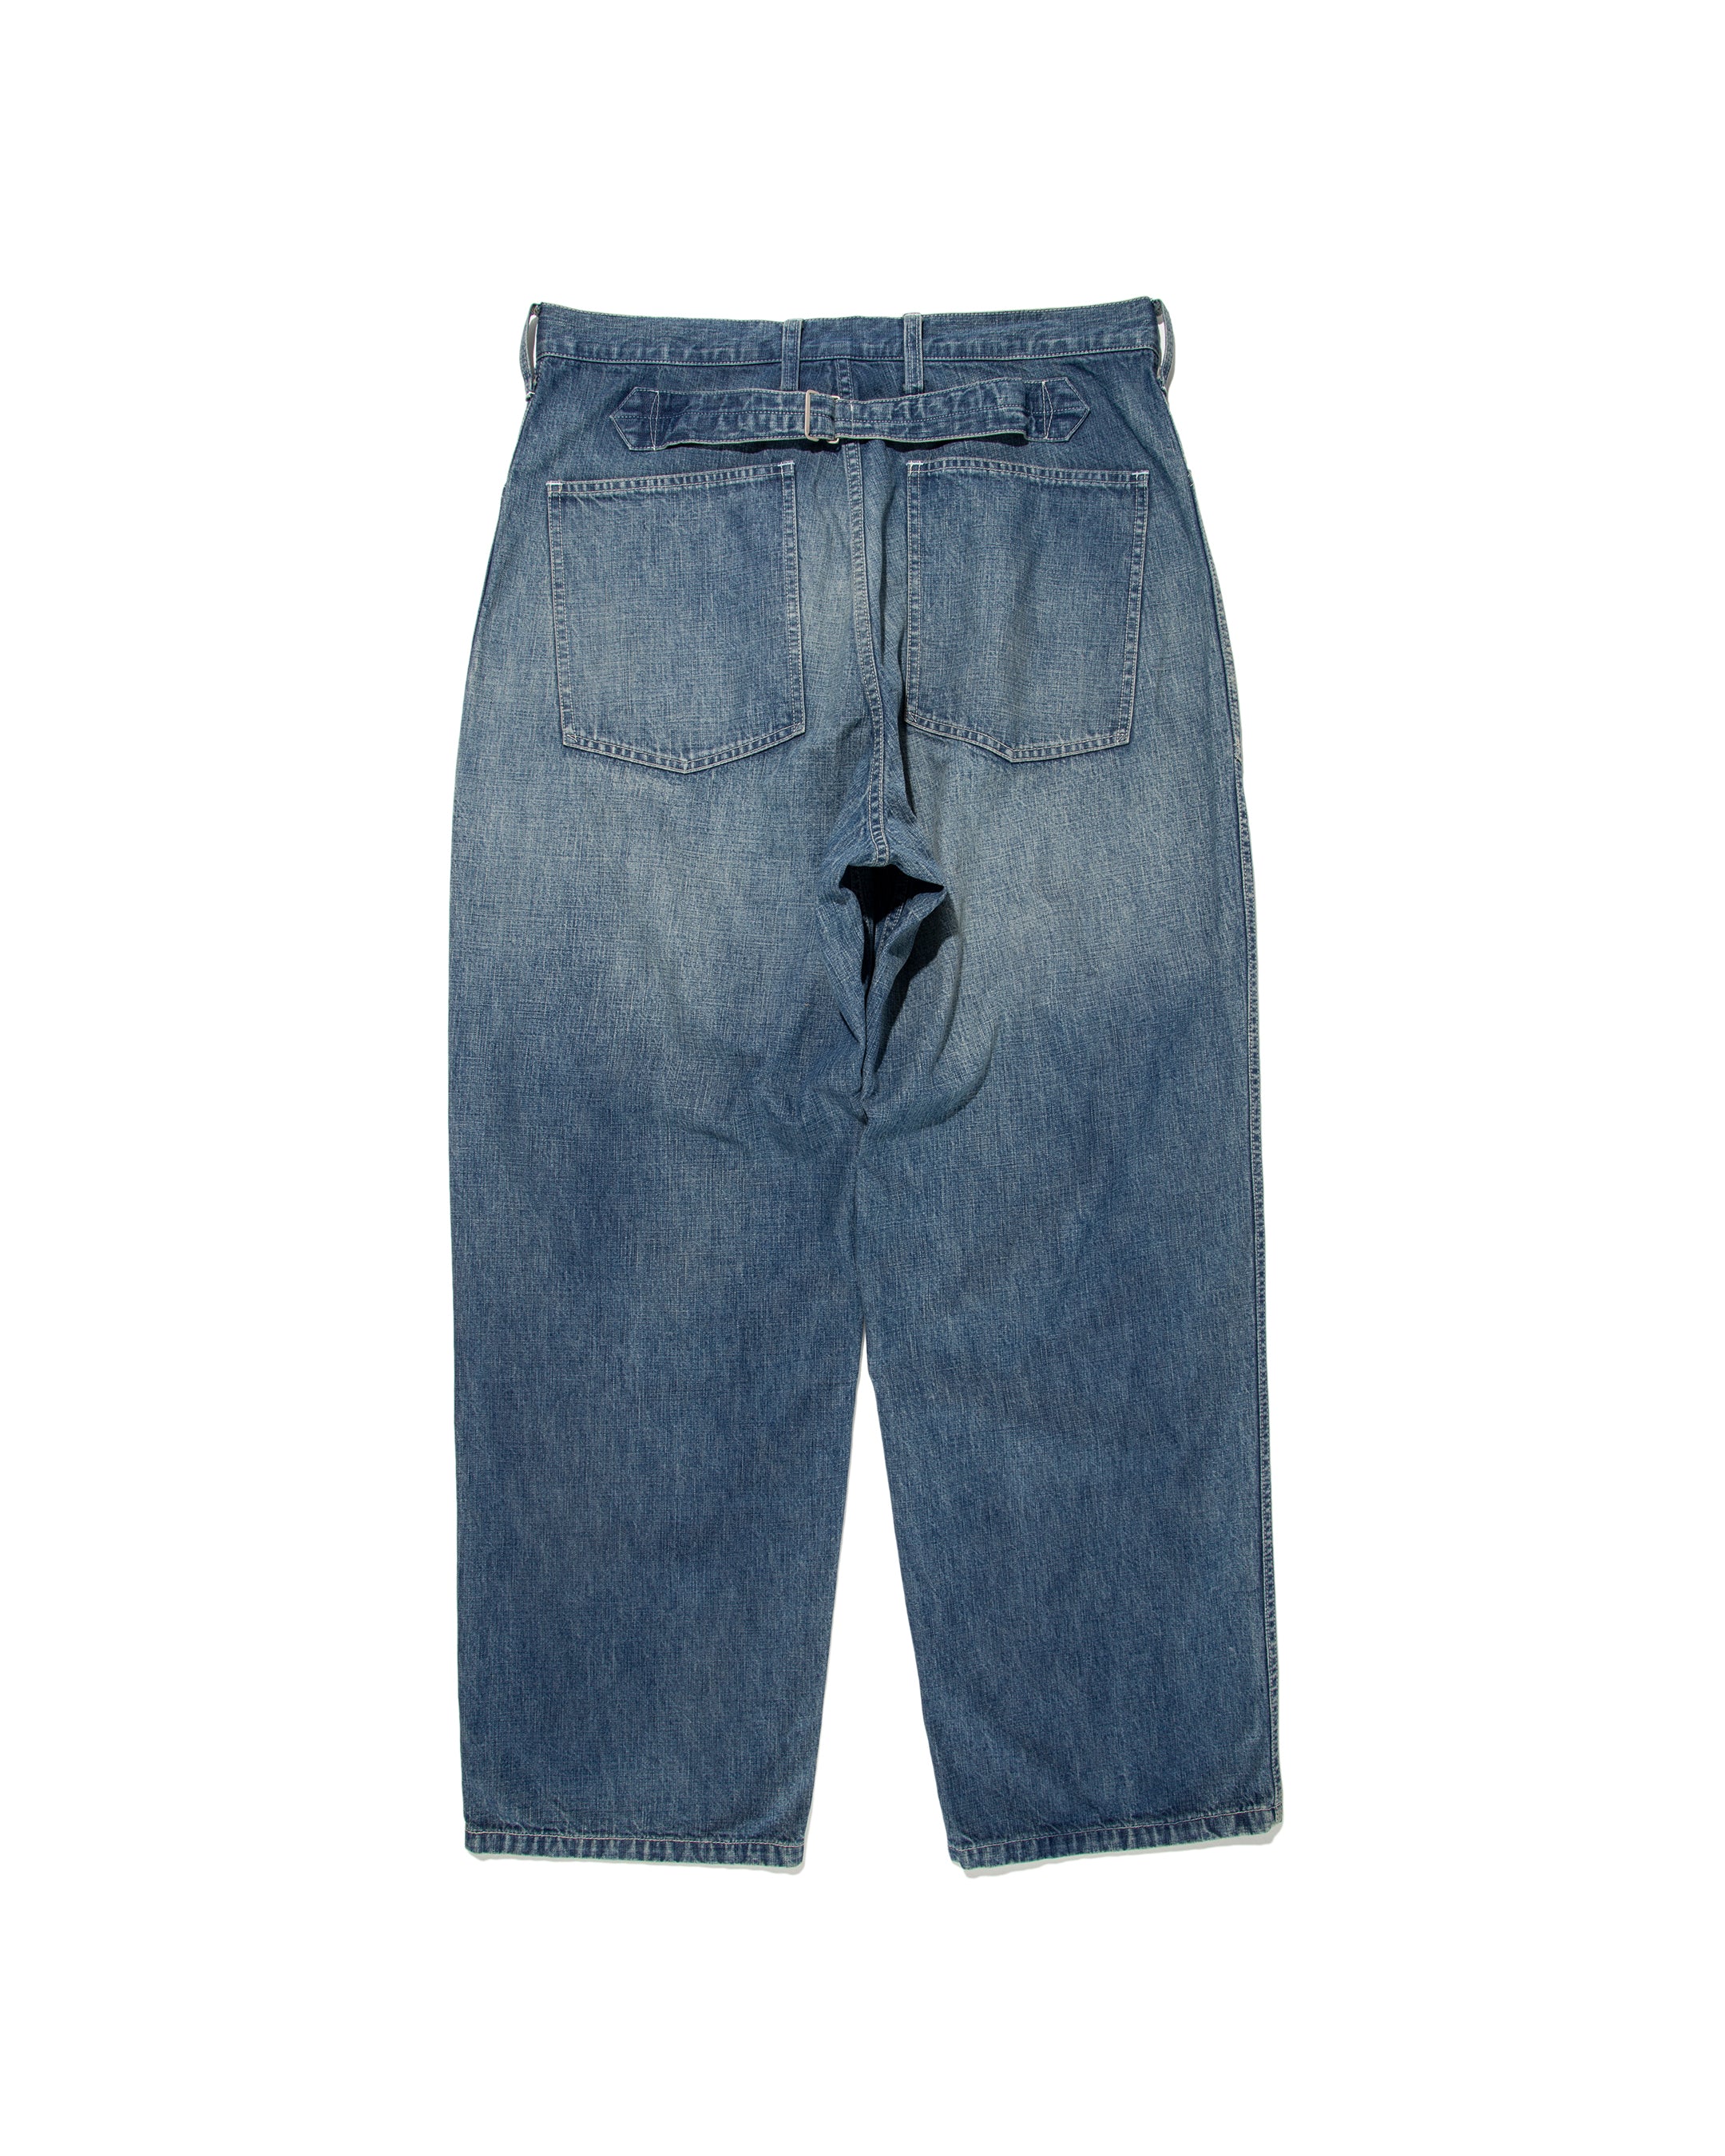 US ARMY M35 DENIM TROUSERS – C30 - BOW WOW 